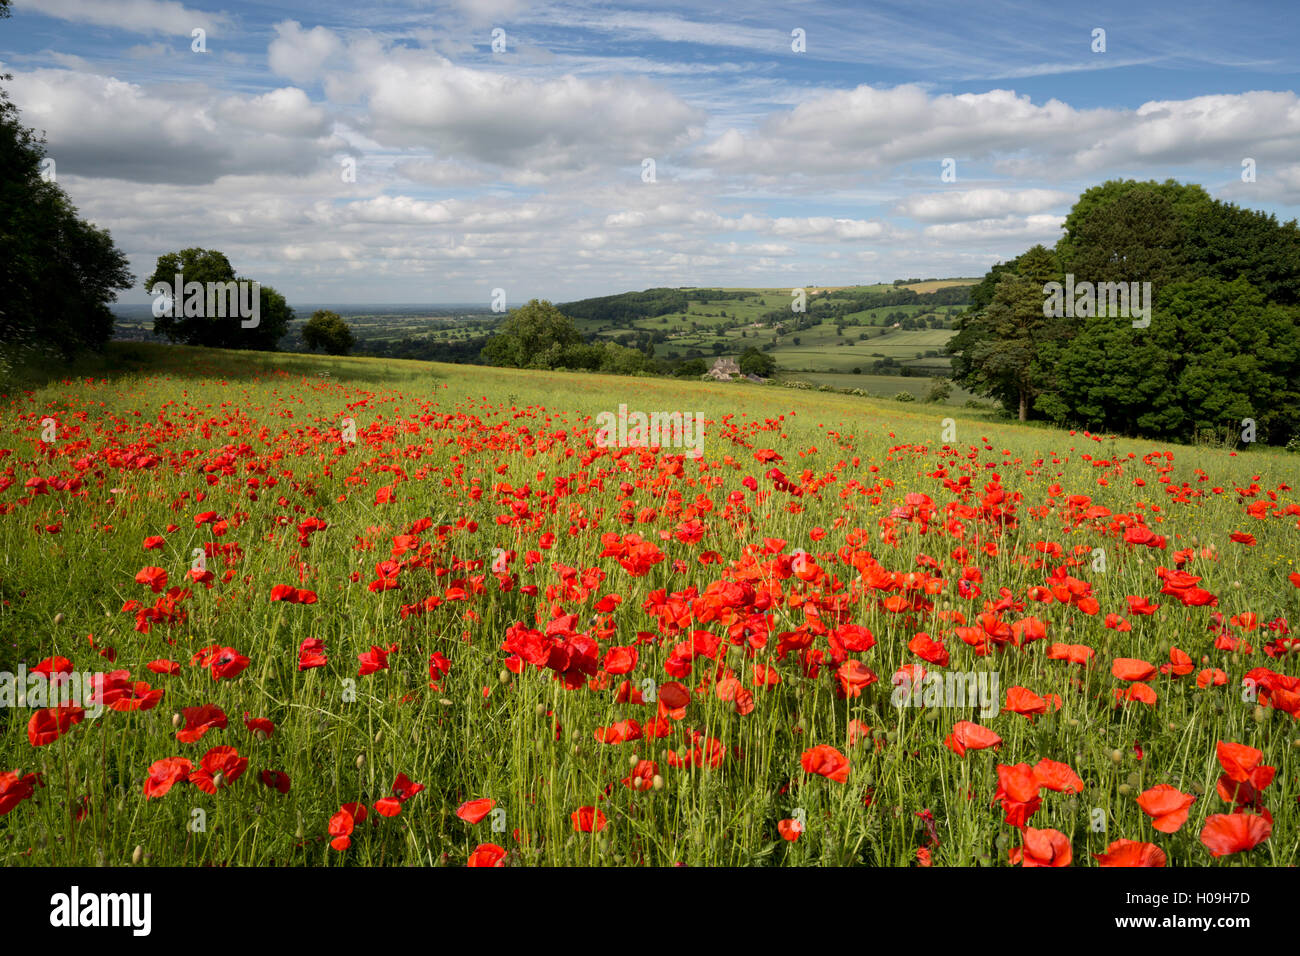 Field of red poppies, near Winchcombe, Cotswolds, Gloucestershire, England, United Kingdom, Europe Stock Photo